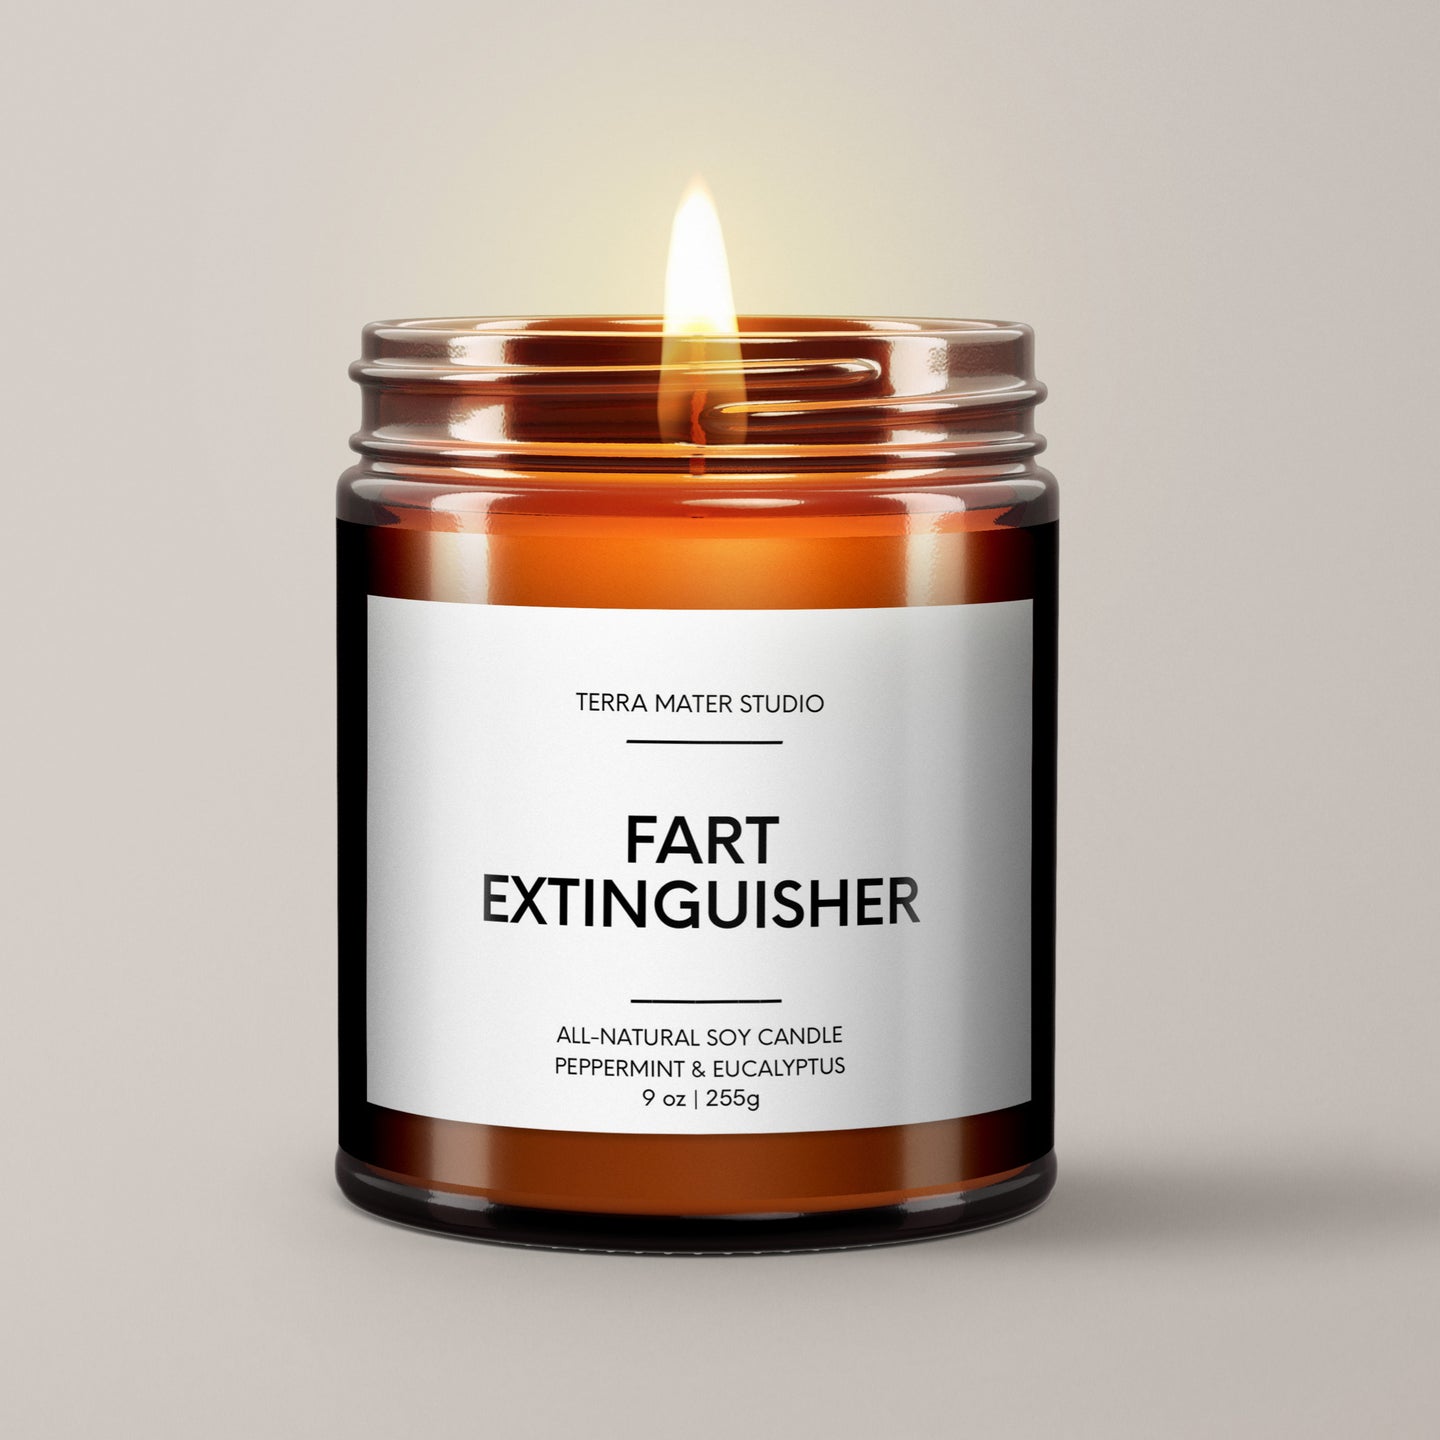 Fart Extinguisher | Funny Candles